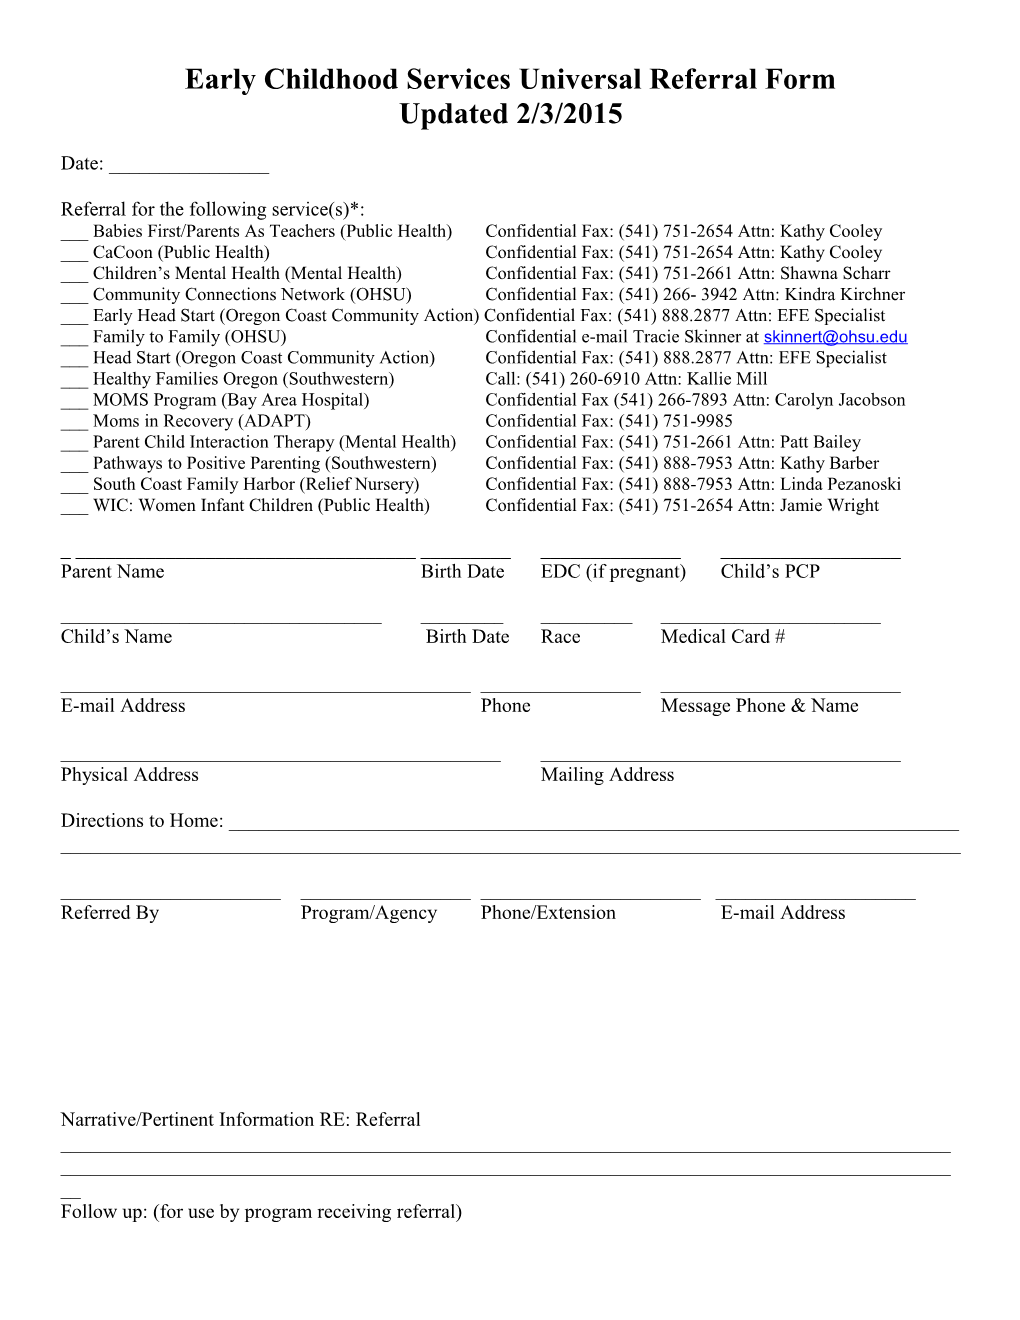 Early Childhood Services Universal Referral Form Updated 2/3/2015